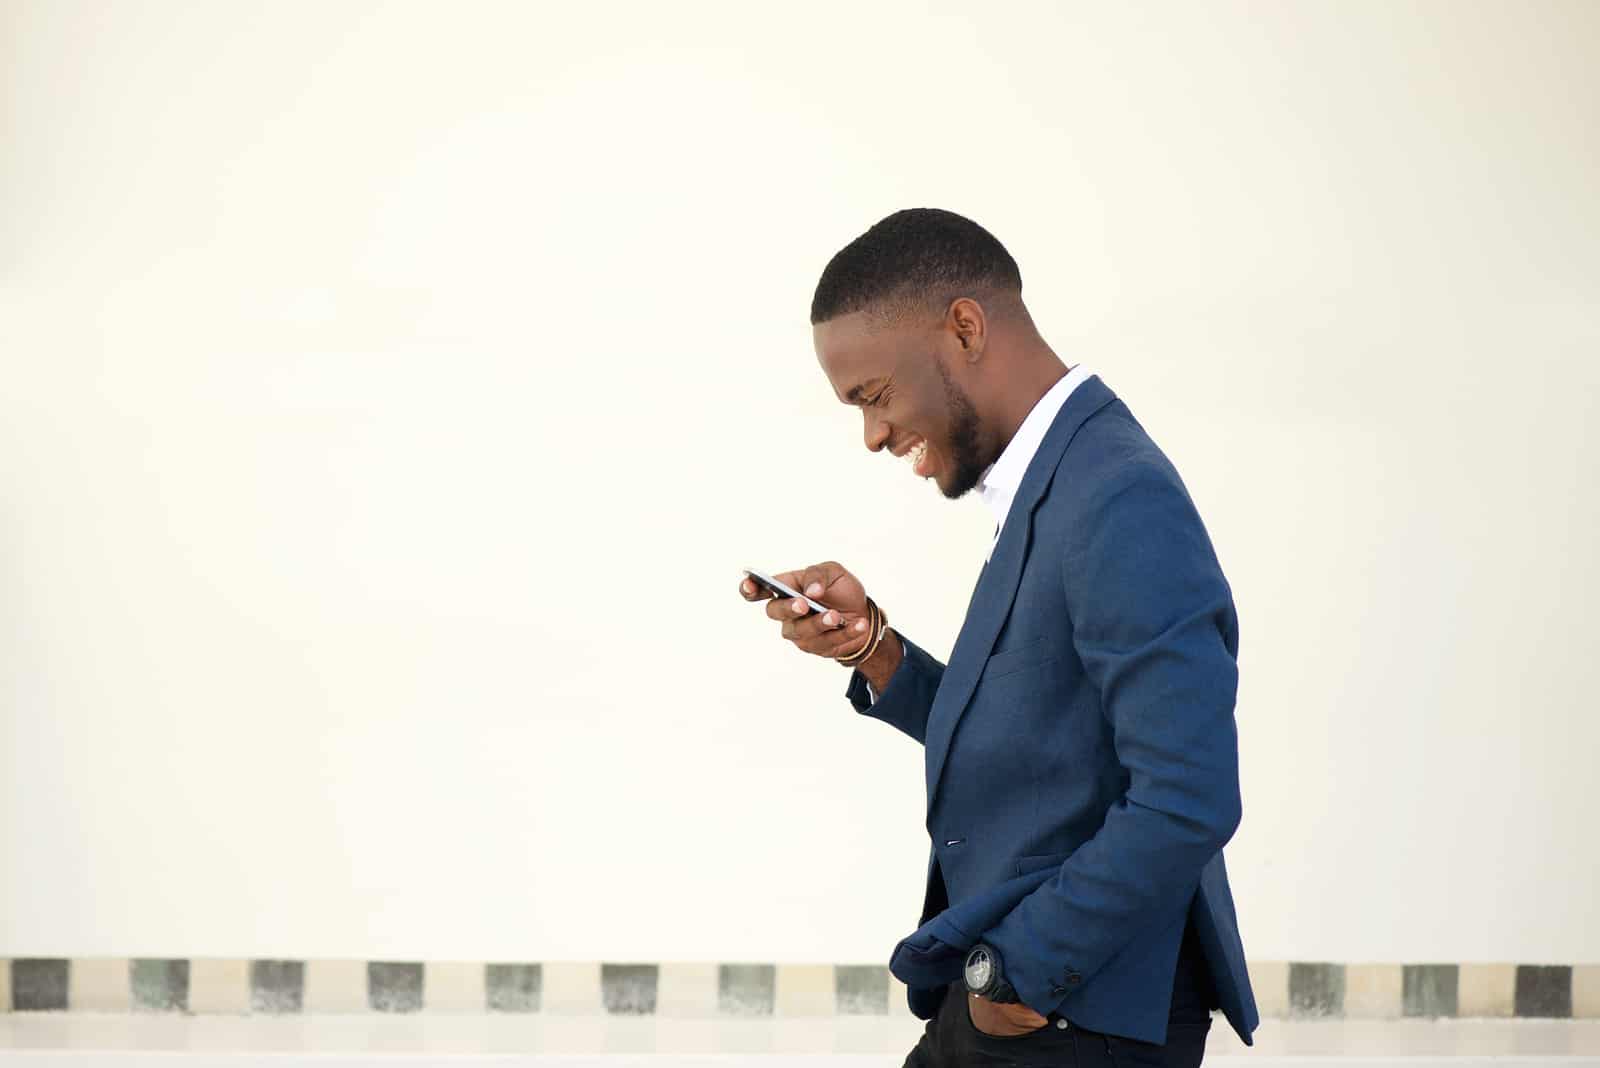 man in a suit looking at his phone